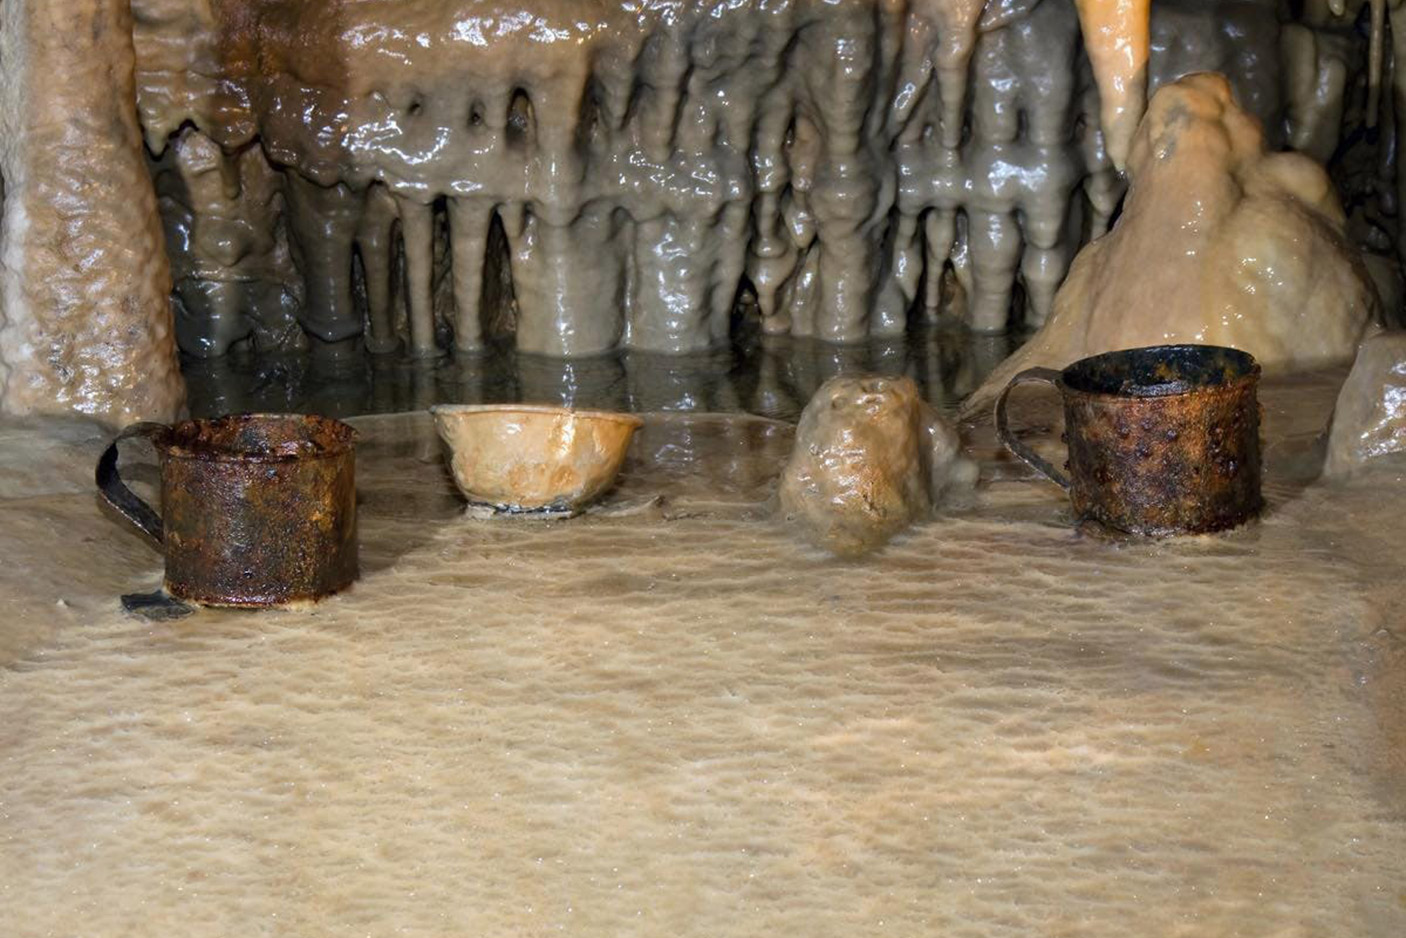 cups inside the cave with formations